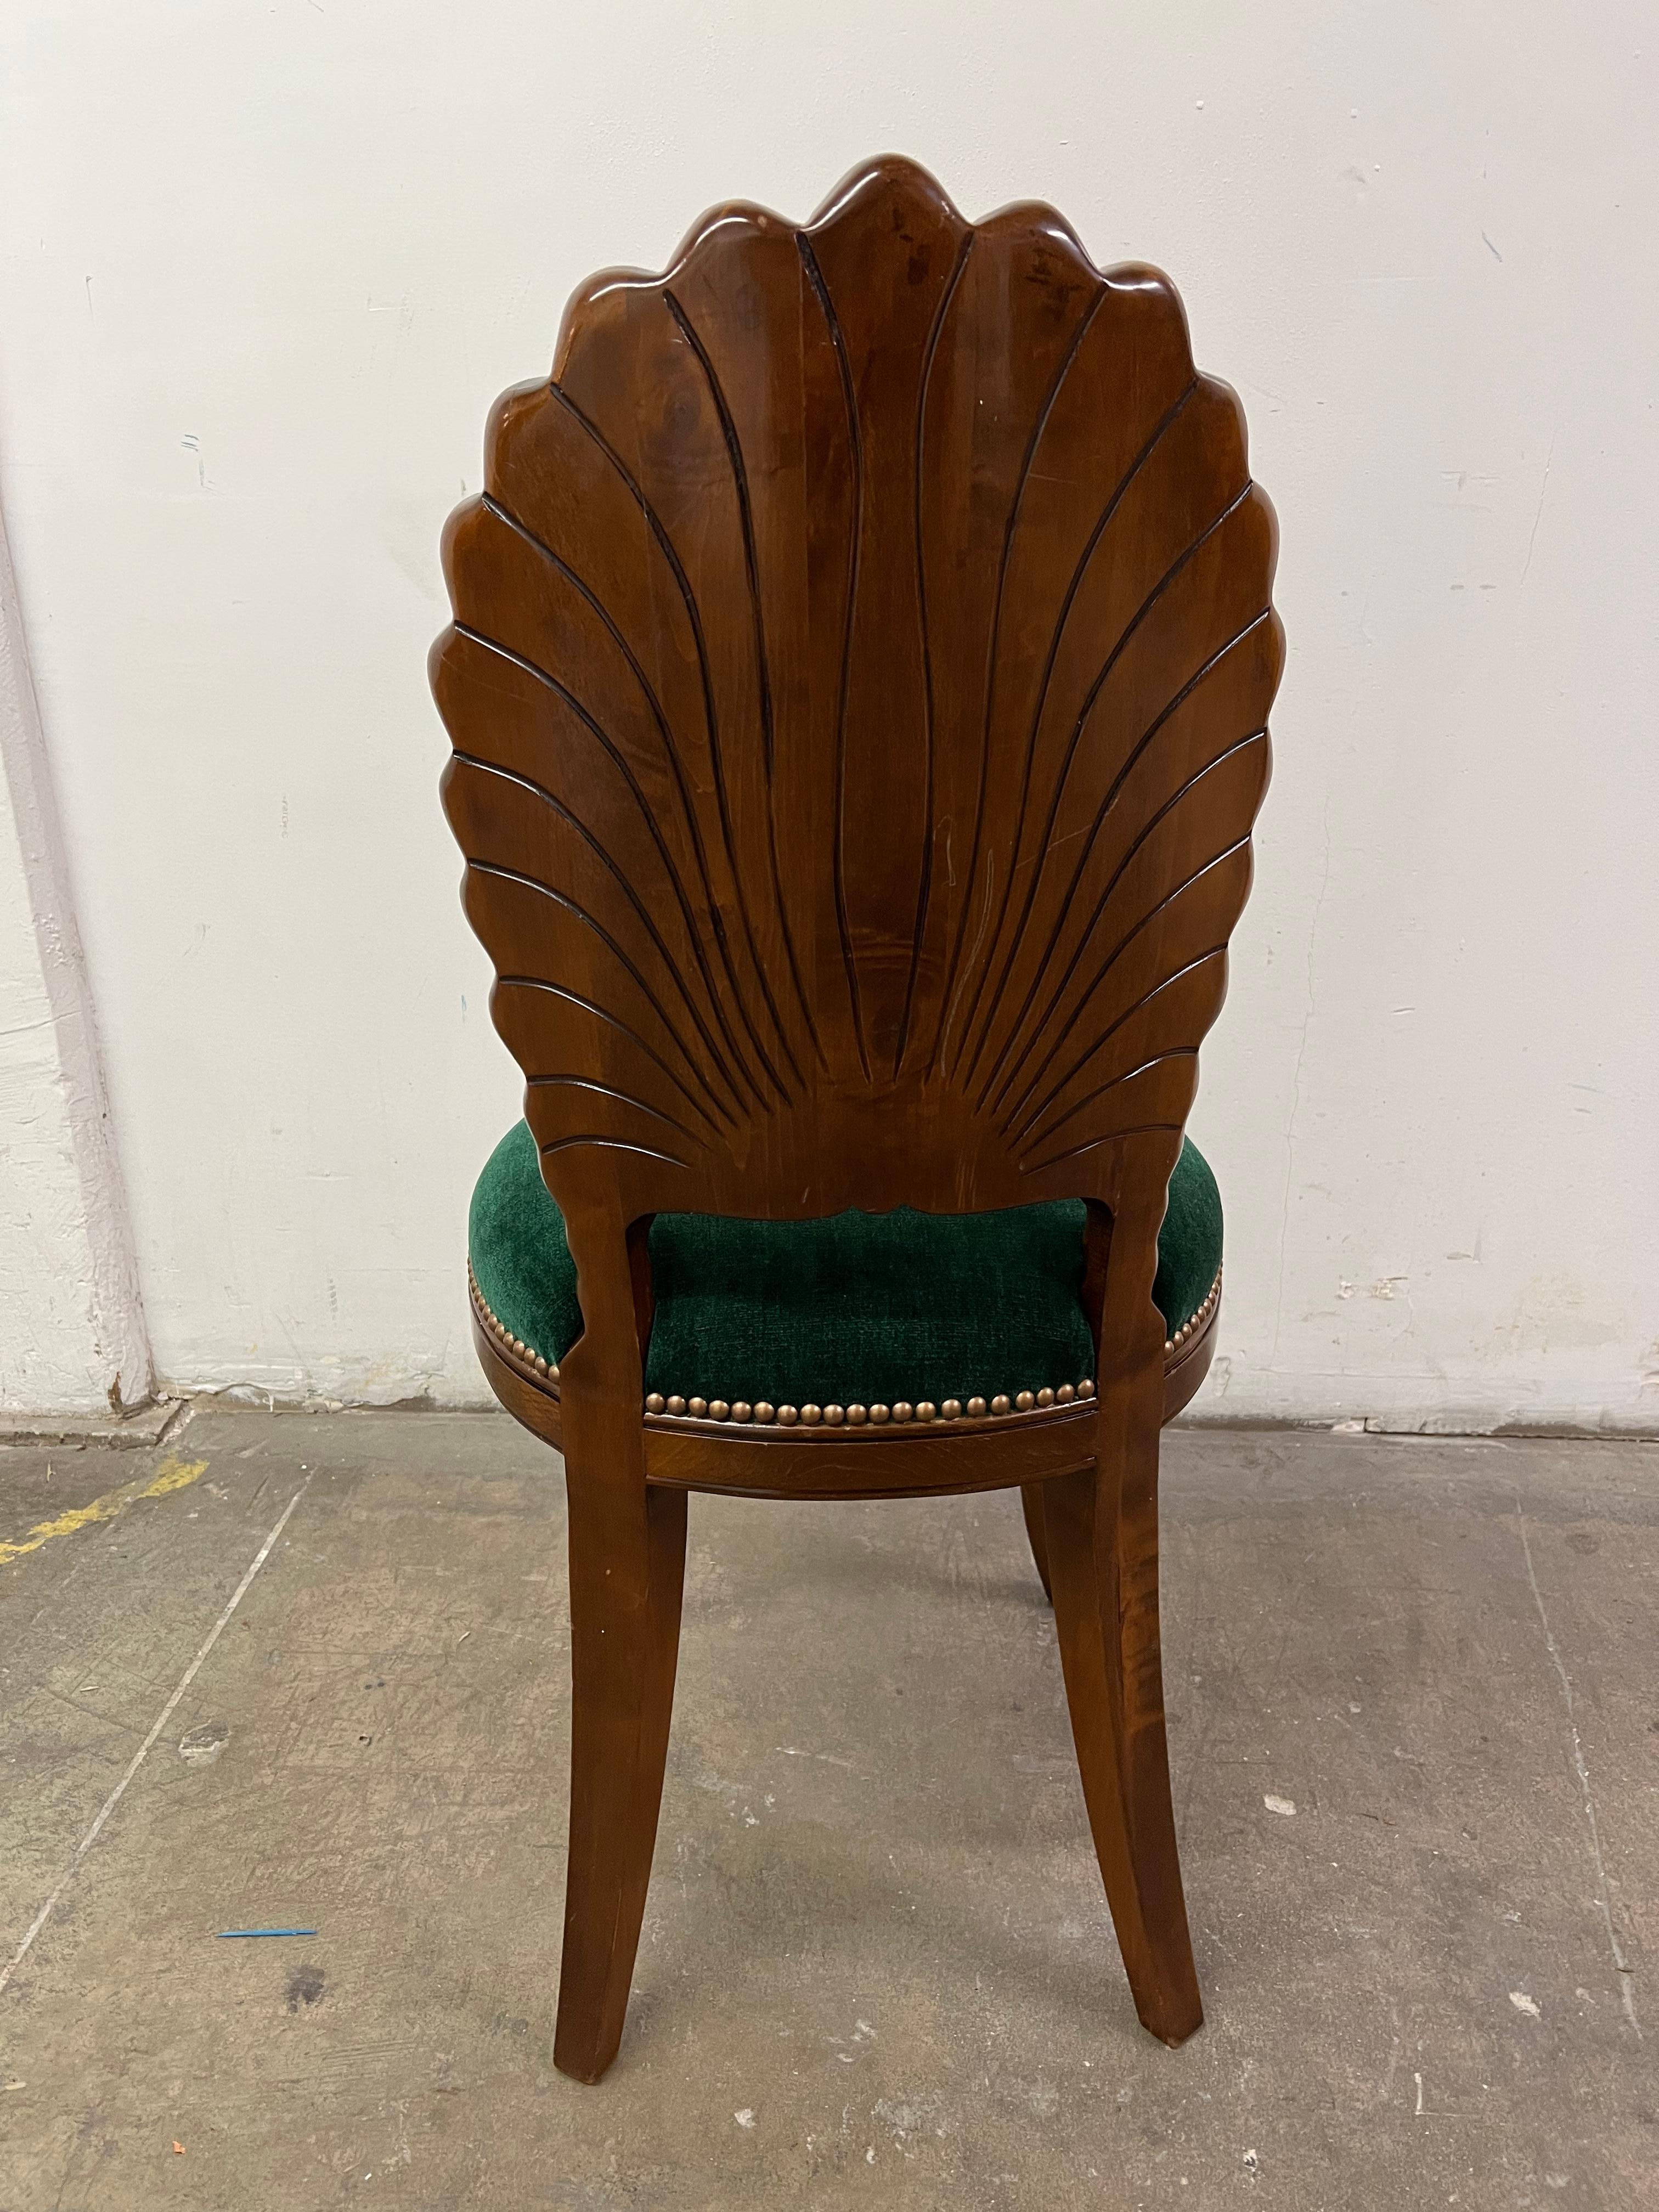 A walnut grotto style chair (or Shell Back Chair) with emerald green mohair upholstery detailed with antique brass nail heads. A lovely piece to be used as a sire chair or decorative piece. While in very good overall condition a scratch to the back,